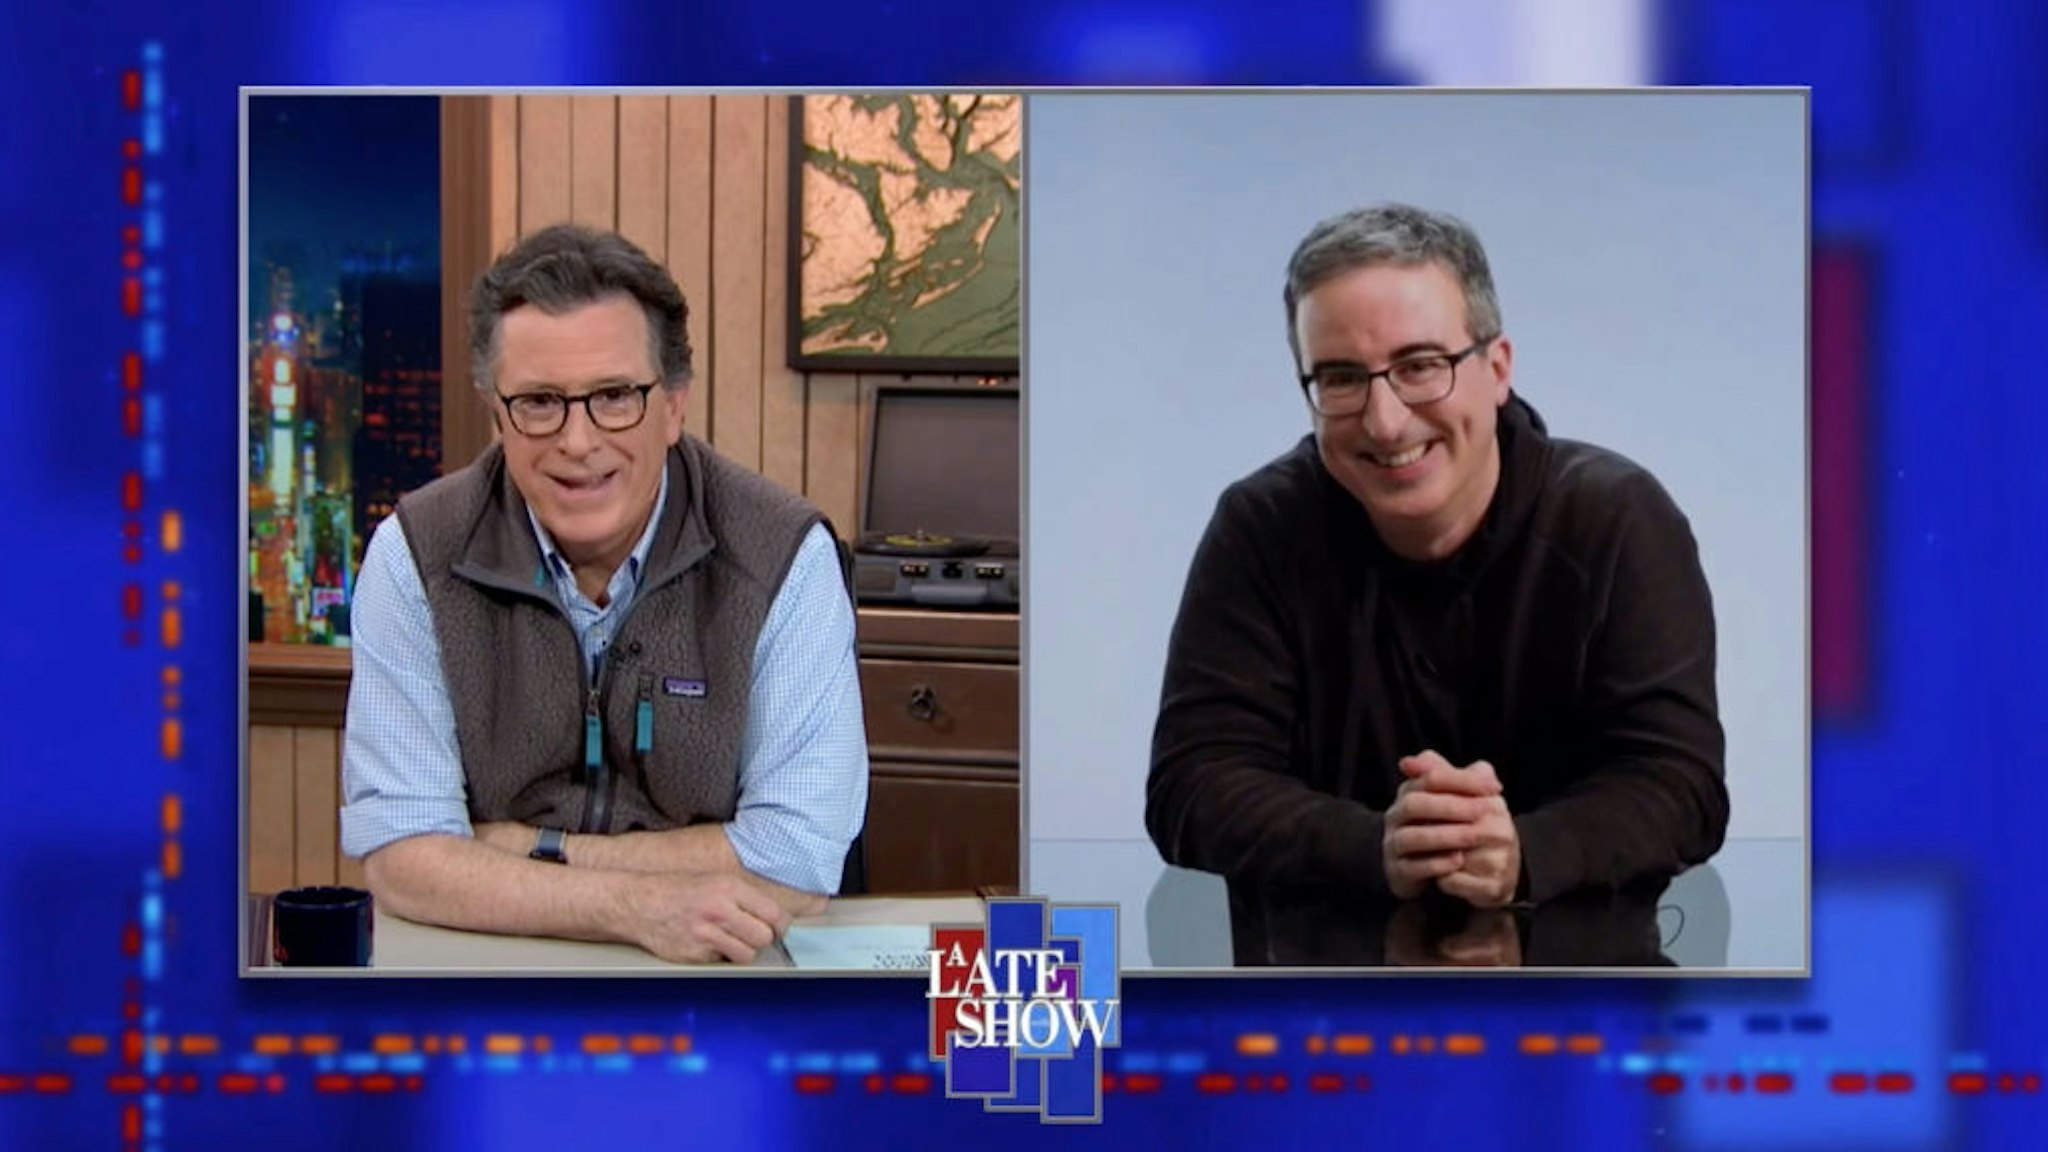 NEW YORK - FEBRUARY 9: A Late Show with Stephen Colbert and guest John Oliver during Tuesday's February 9, 2021 Show. Image is a screen grab. (Photo by CBS via Getty Images)